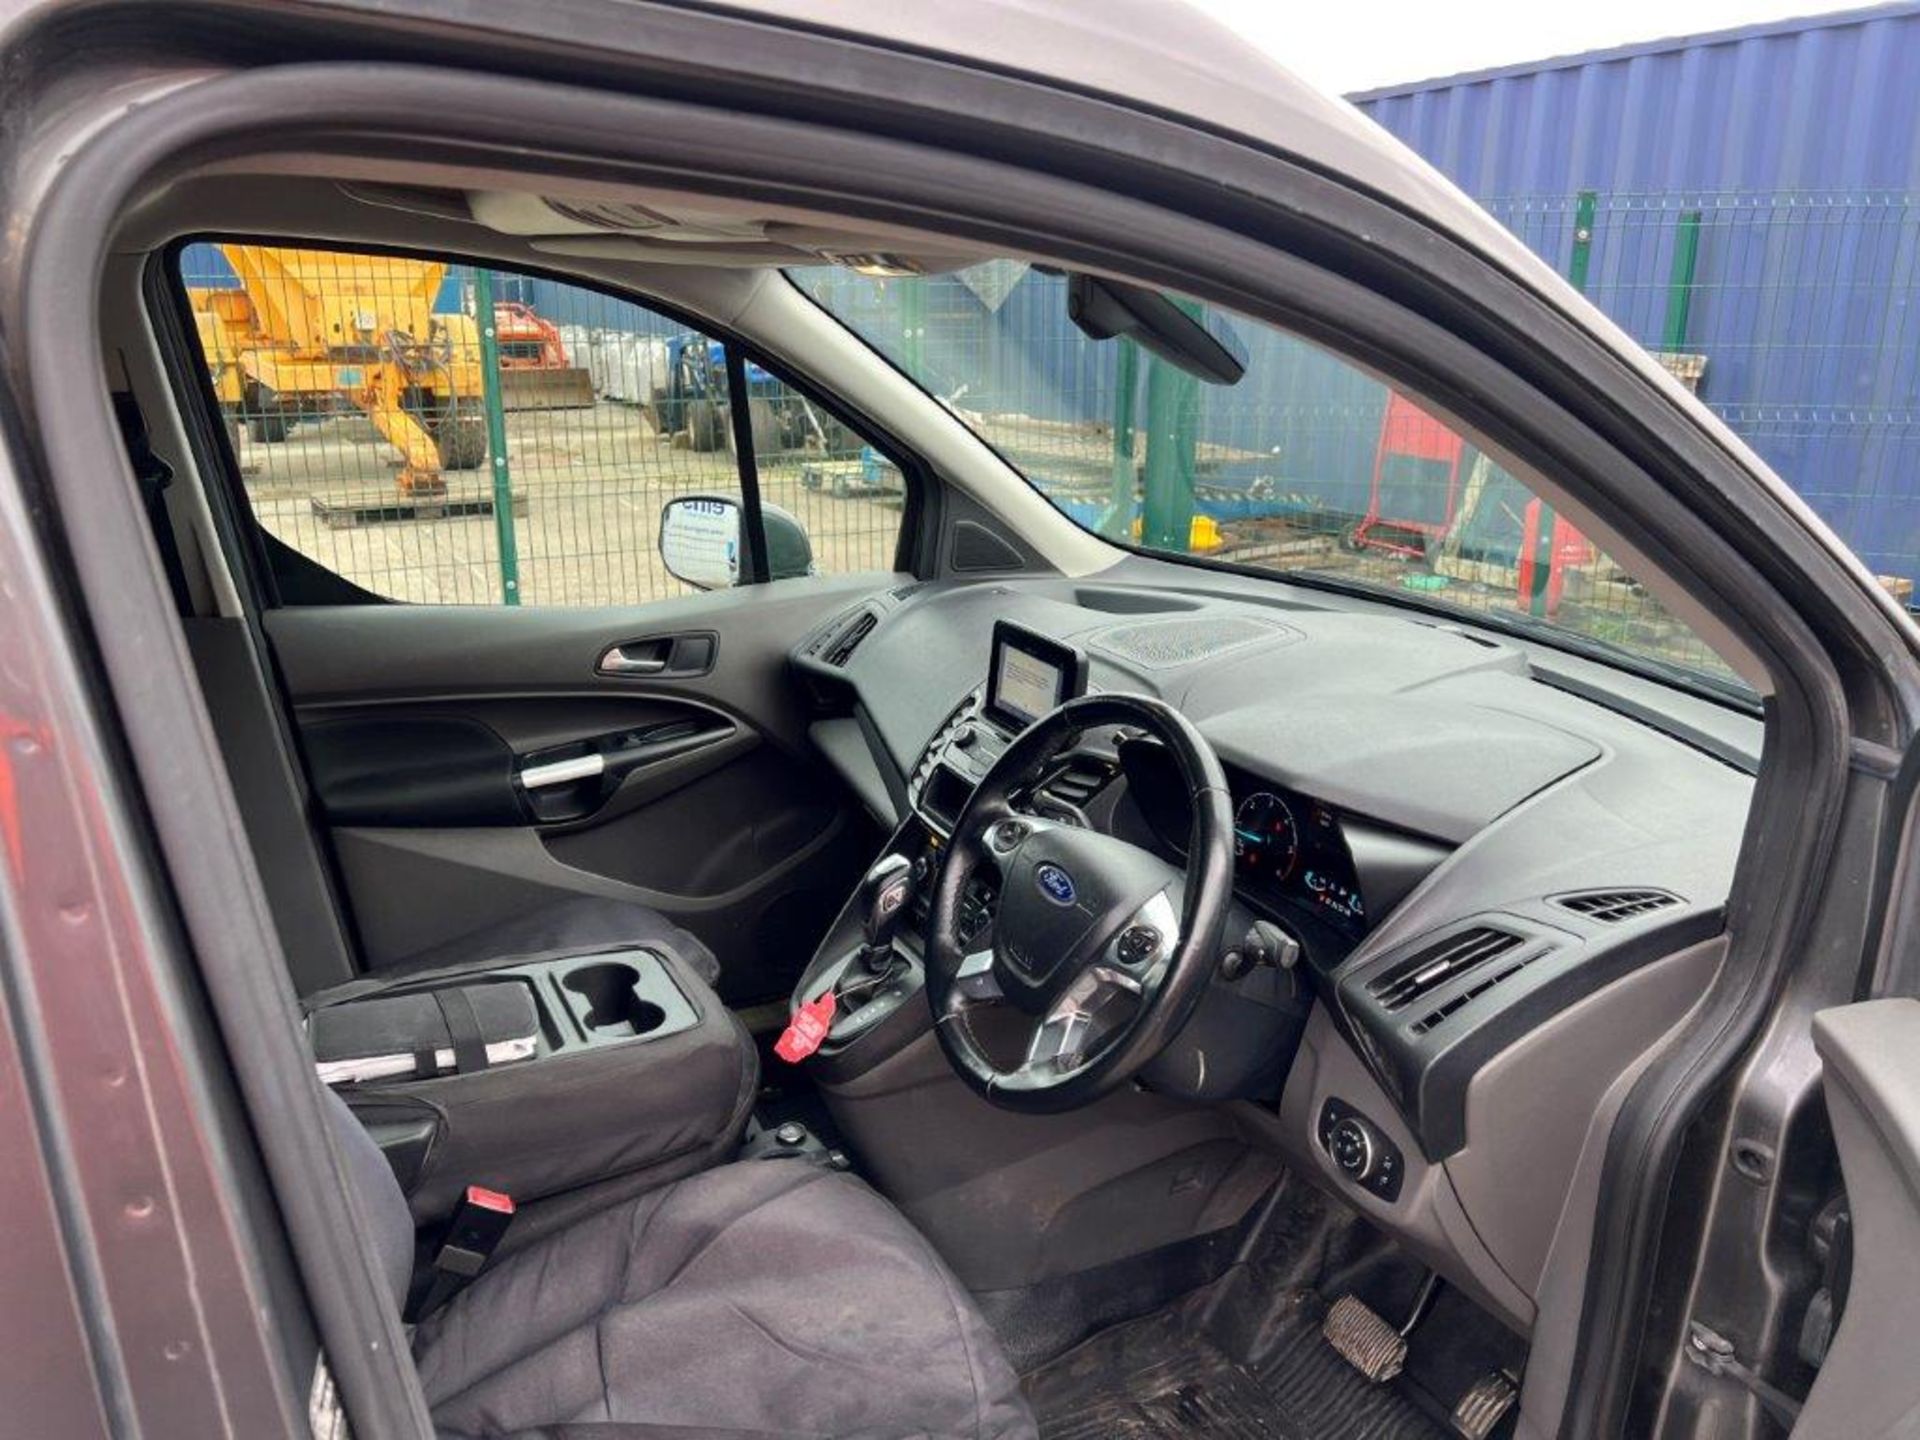 Ford Transit Connect 200 LTD TDCI Auto, Euro 6, 2019, facelift dash/screen - Image 8 of 16